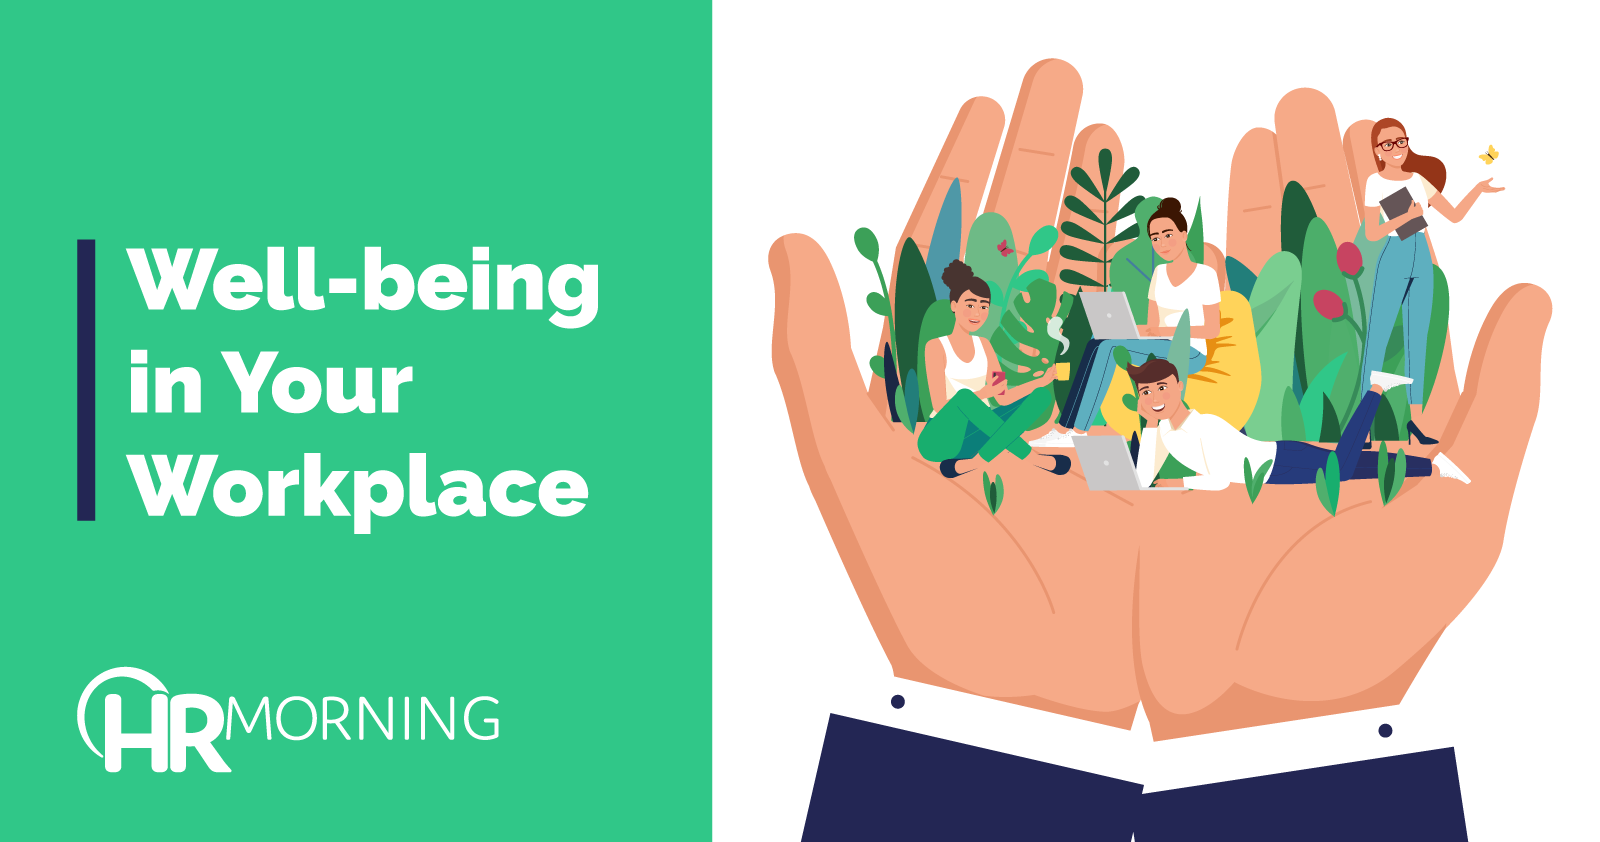 Well-being In Your Workplace